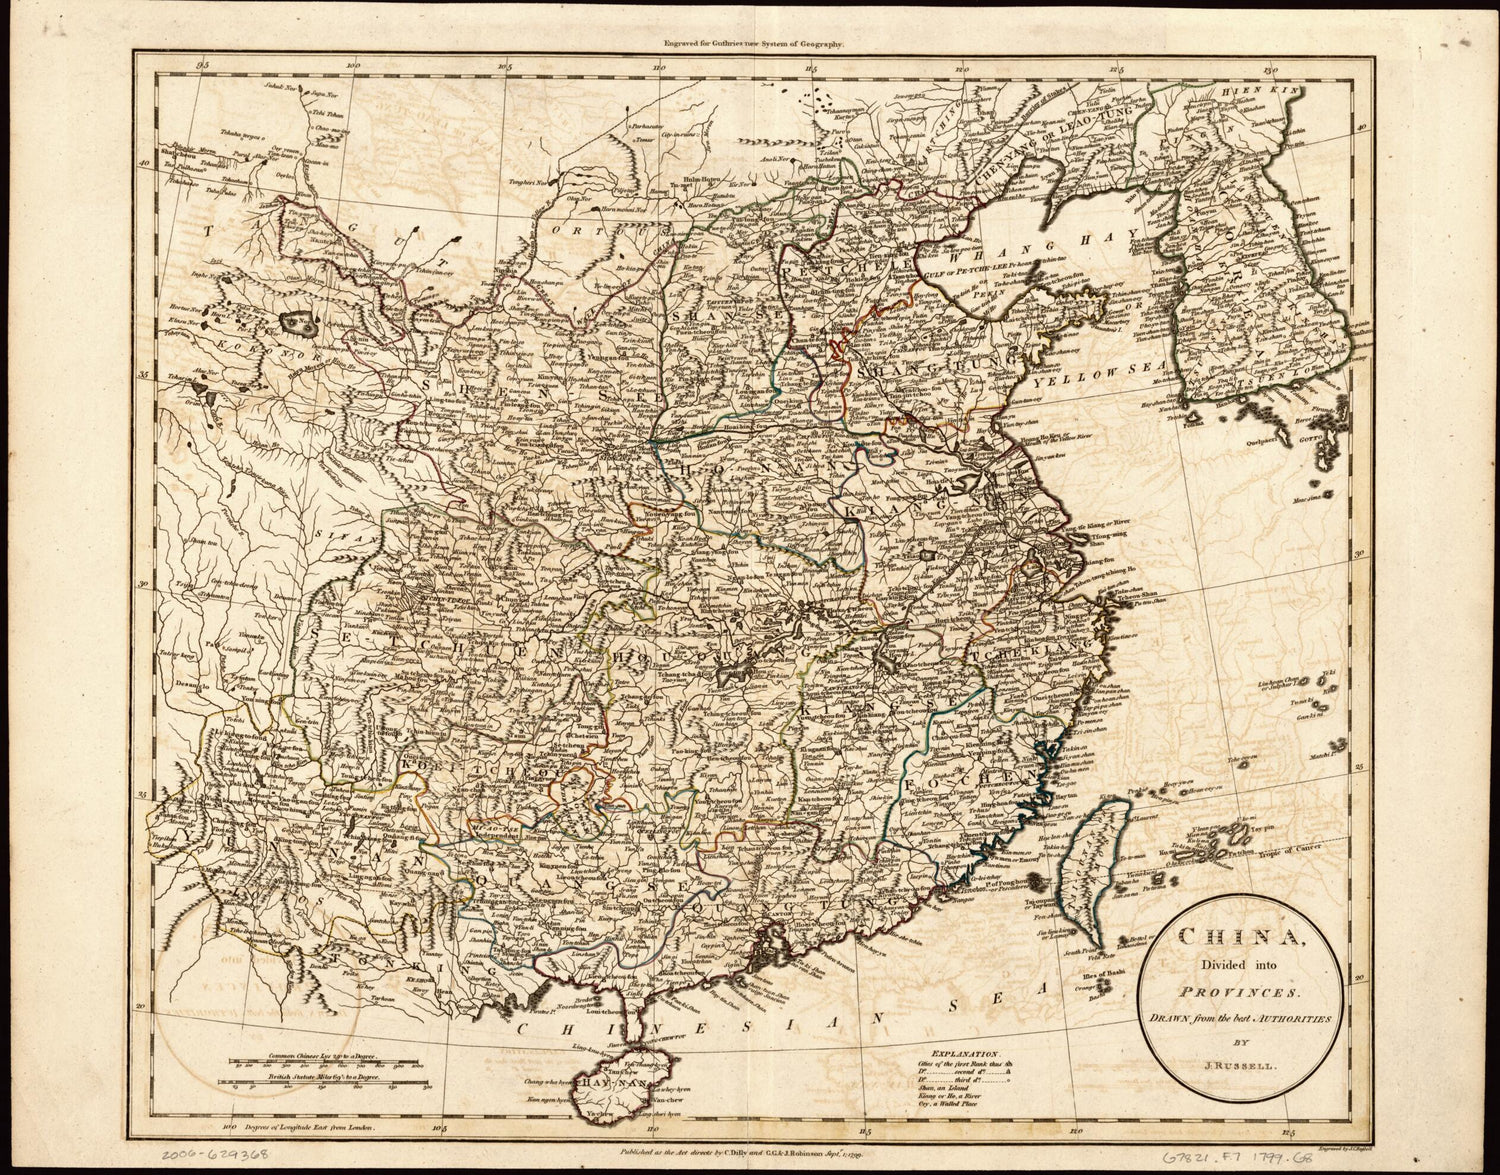 This old map of China Divided Into Provinces Drawn from the Best Authorities from 1799 was created by William Guthrie in 1799